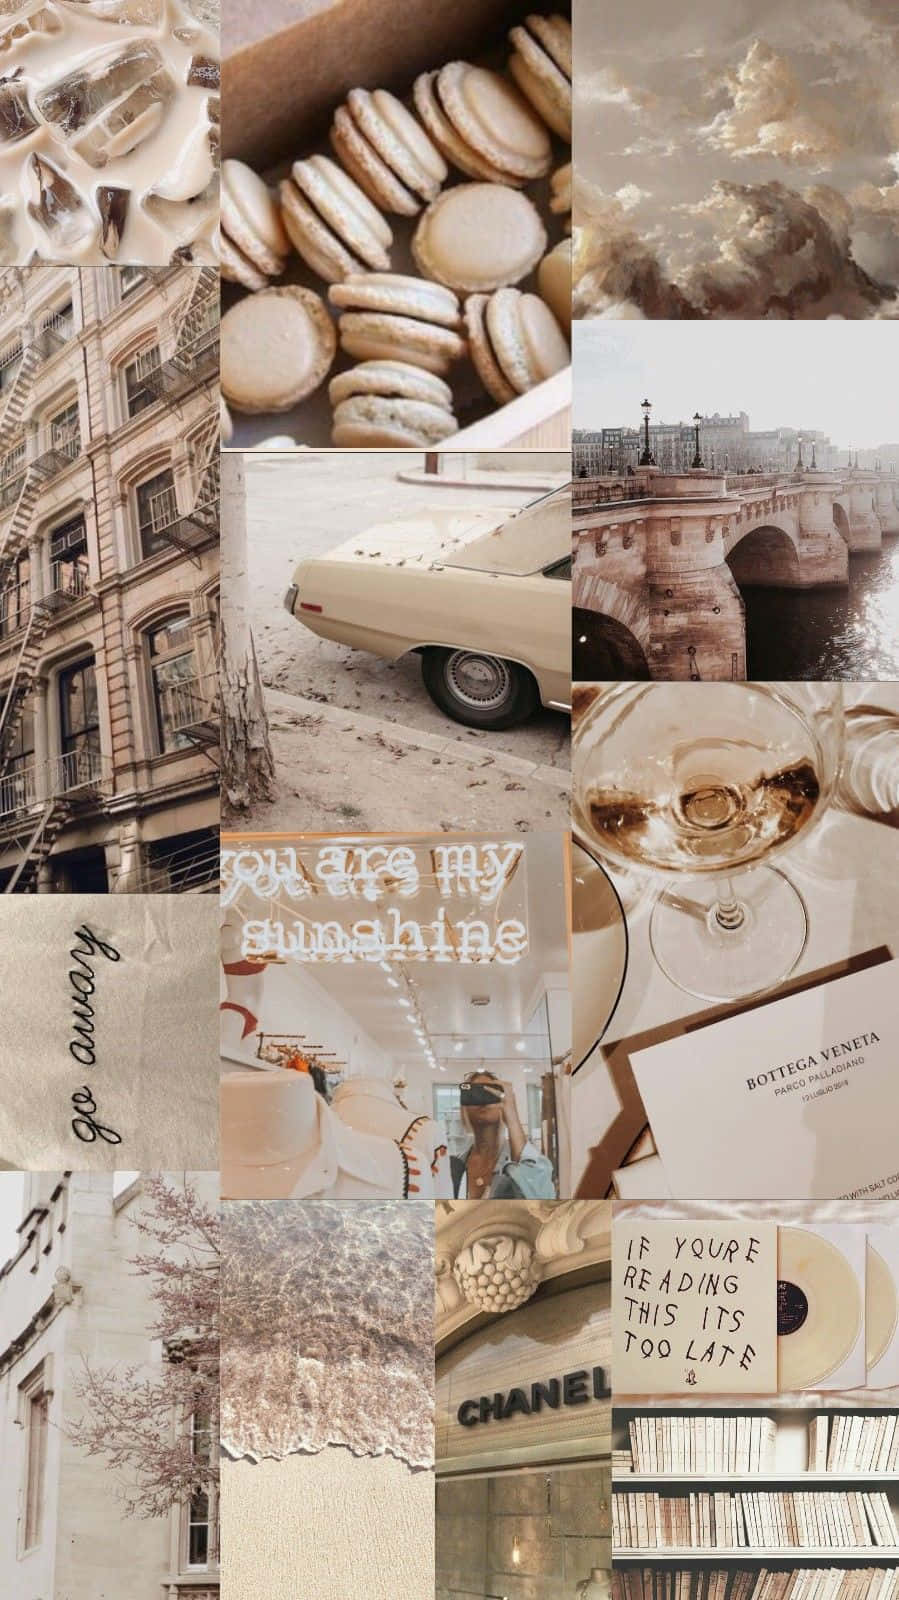 A Collage Of Pictures Of A City And A Bakery